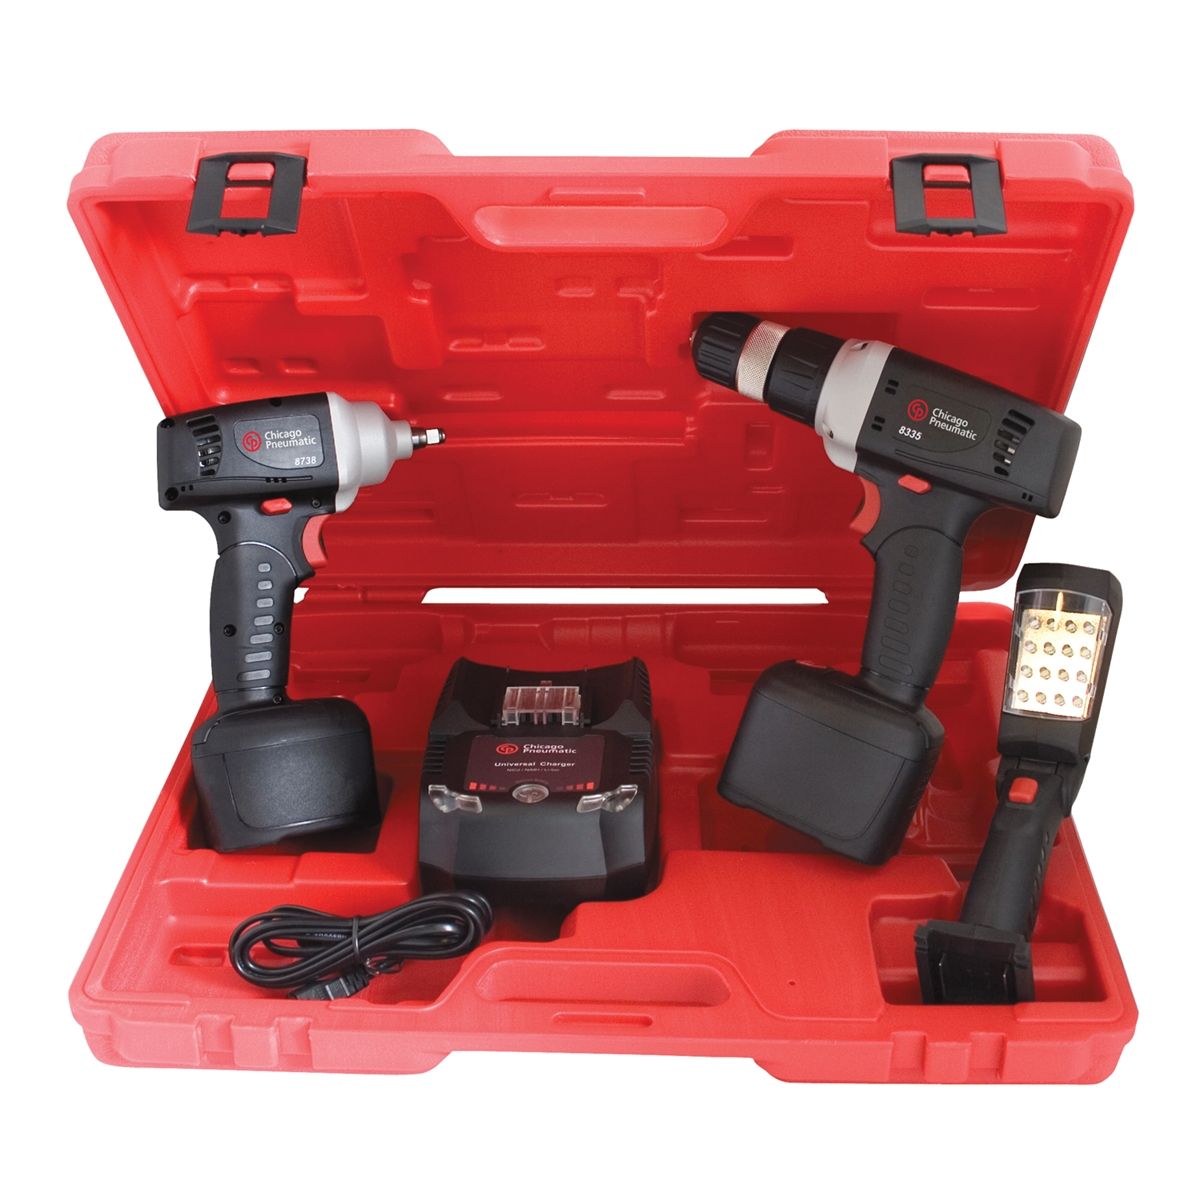 3/8" Drive 12 Volt Cordless Impact Wrench, Drill and Light Kit